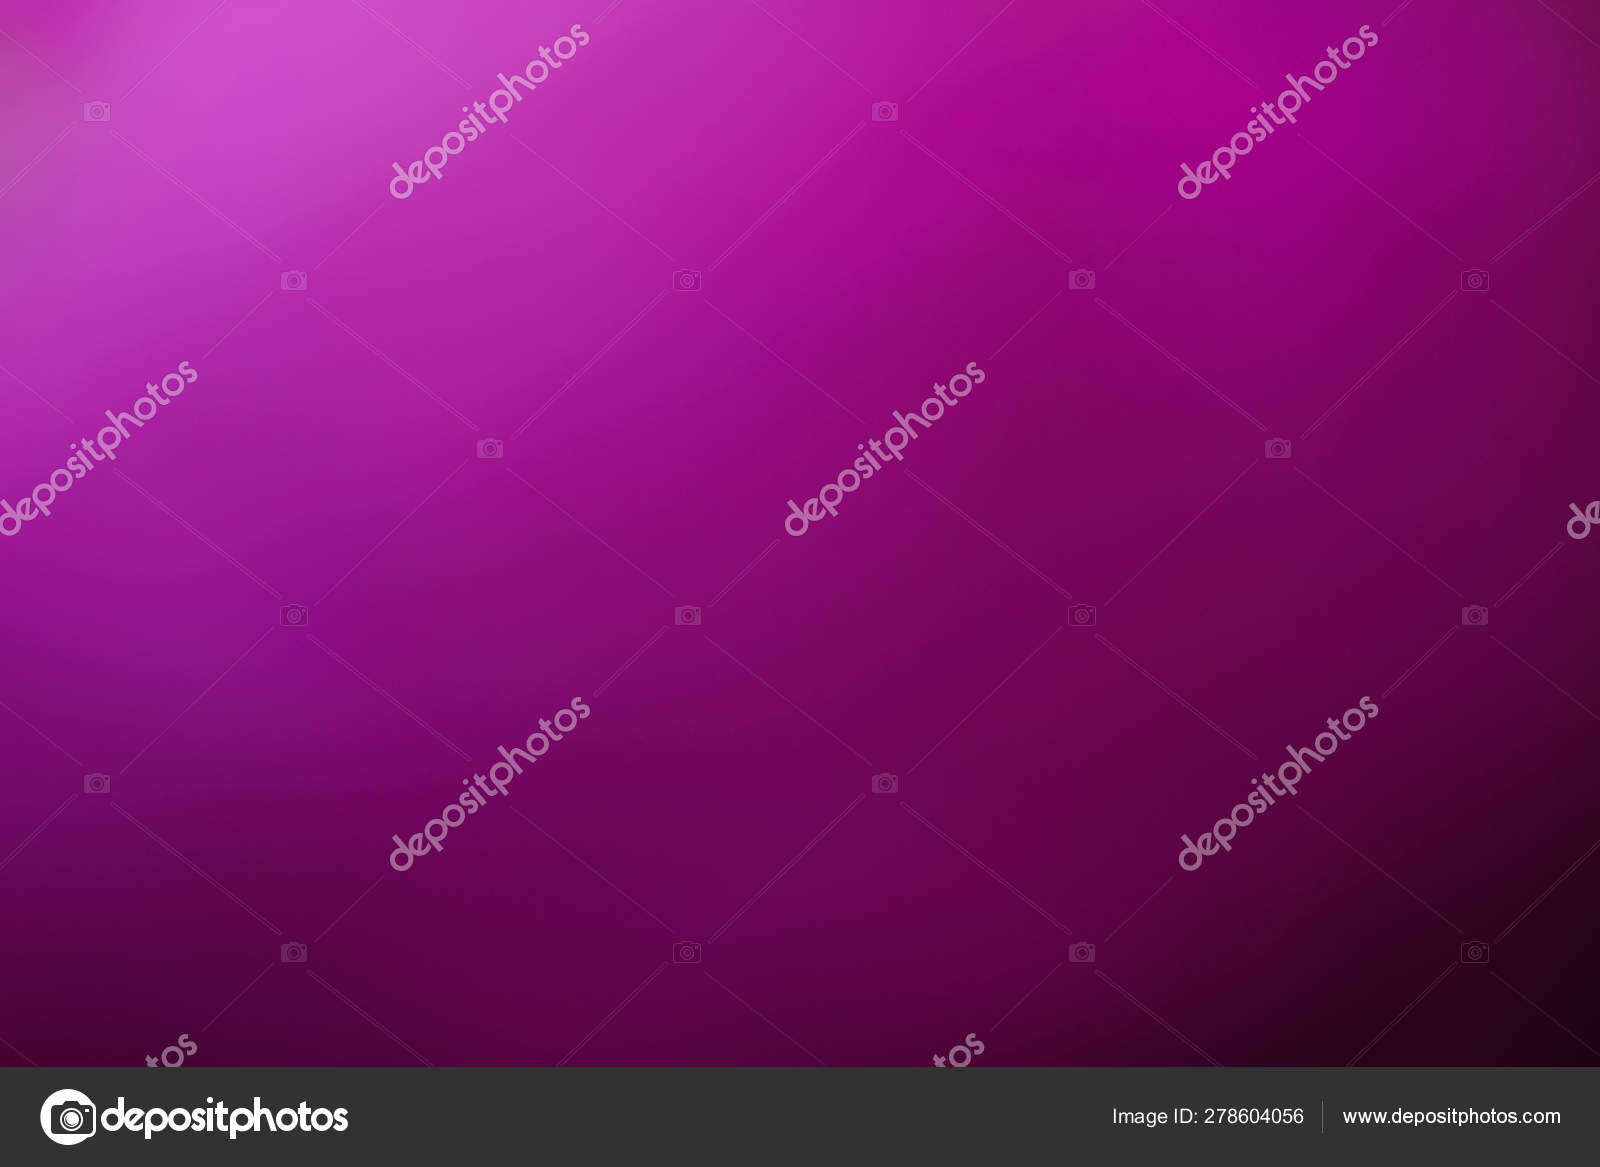 Blurred banner background Stock Photos, Royalty Free Blurred banner  background Images | Depositphotos